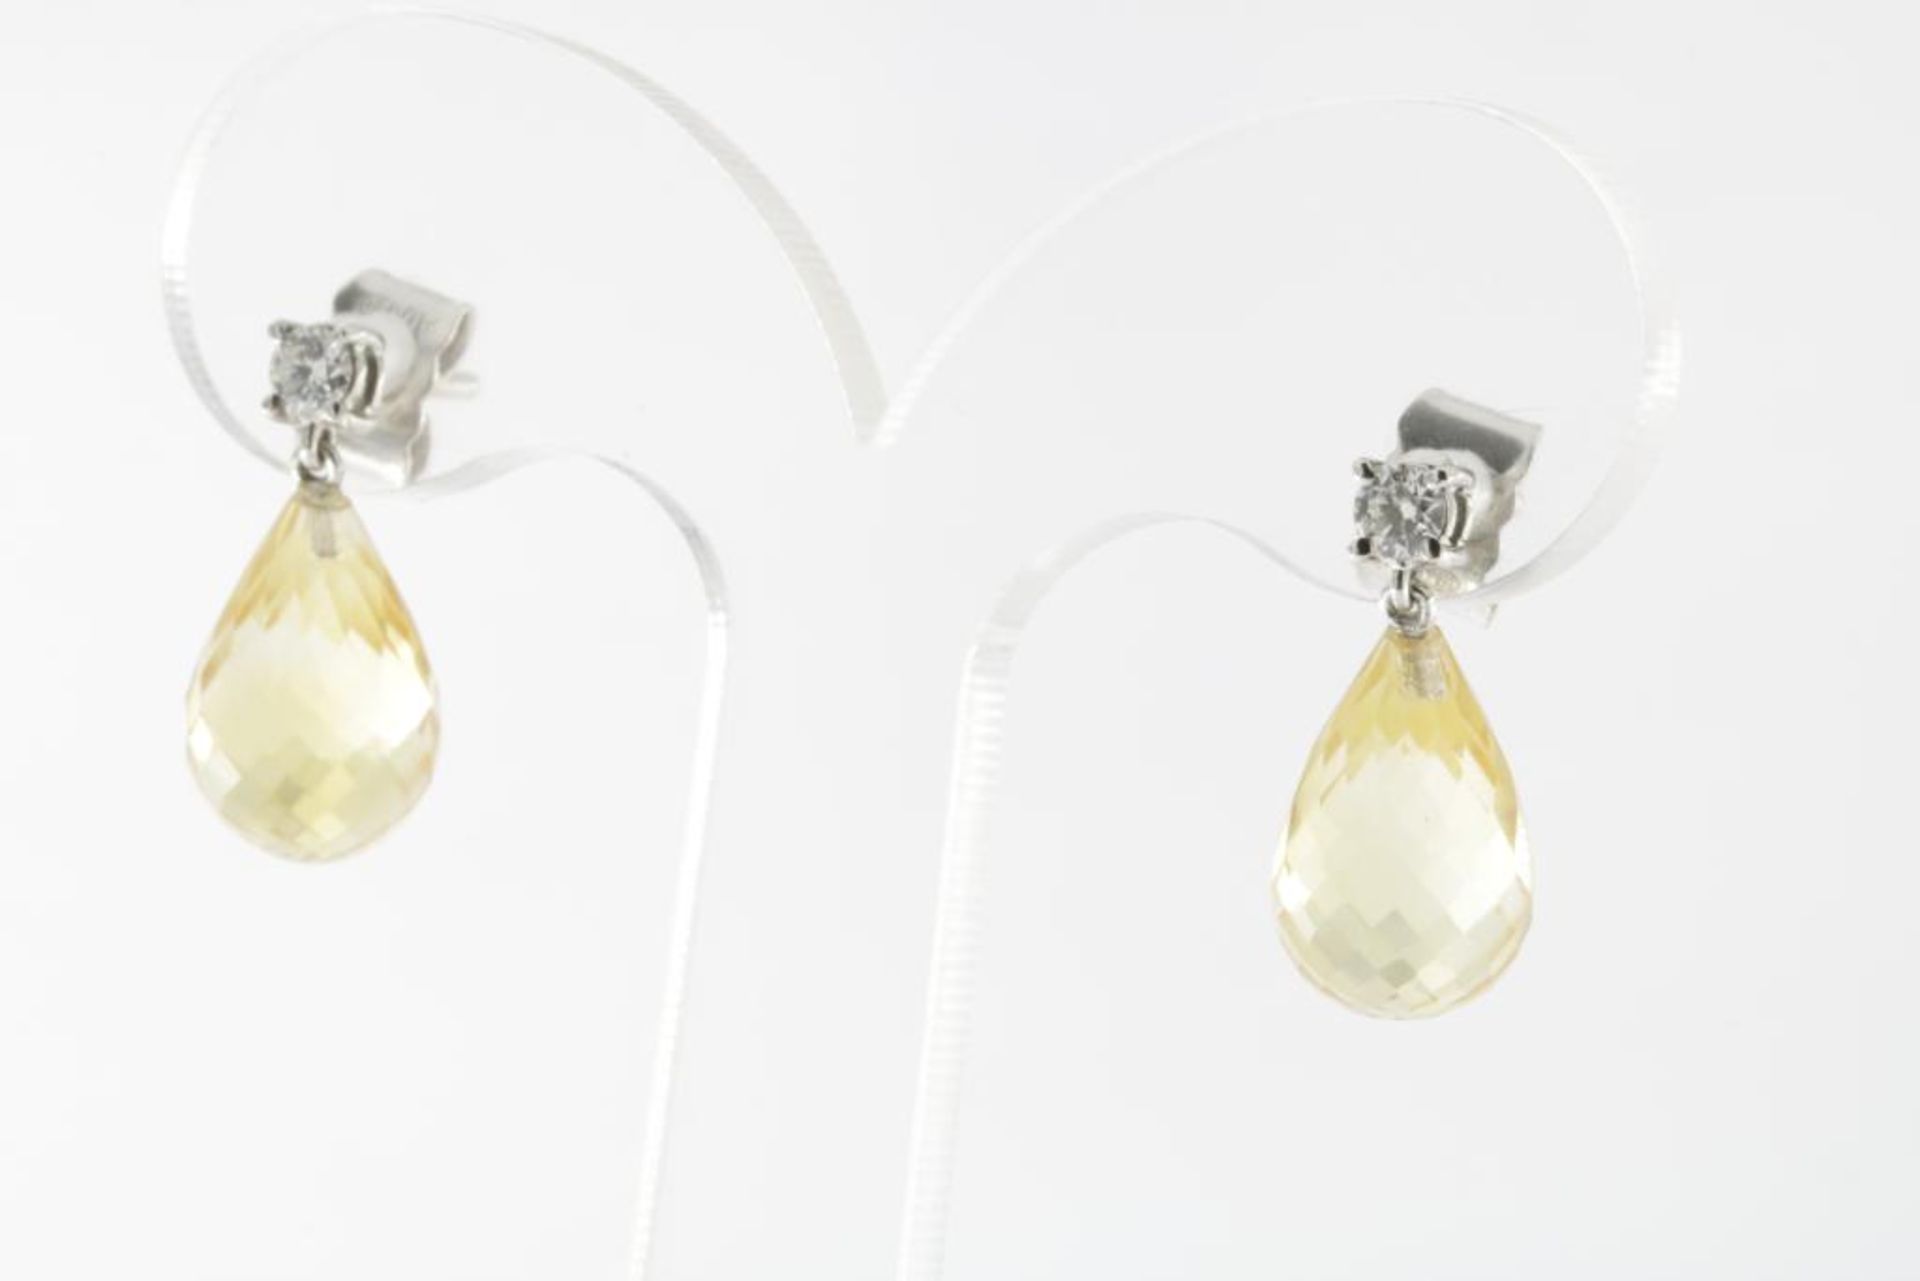 A pair of white gold earrings with citrine